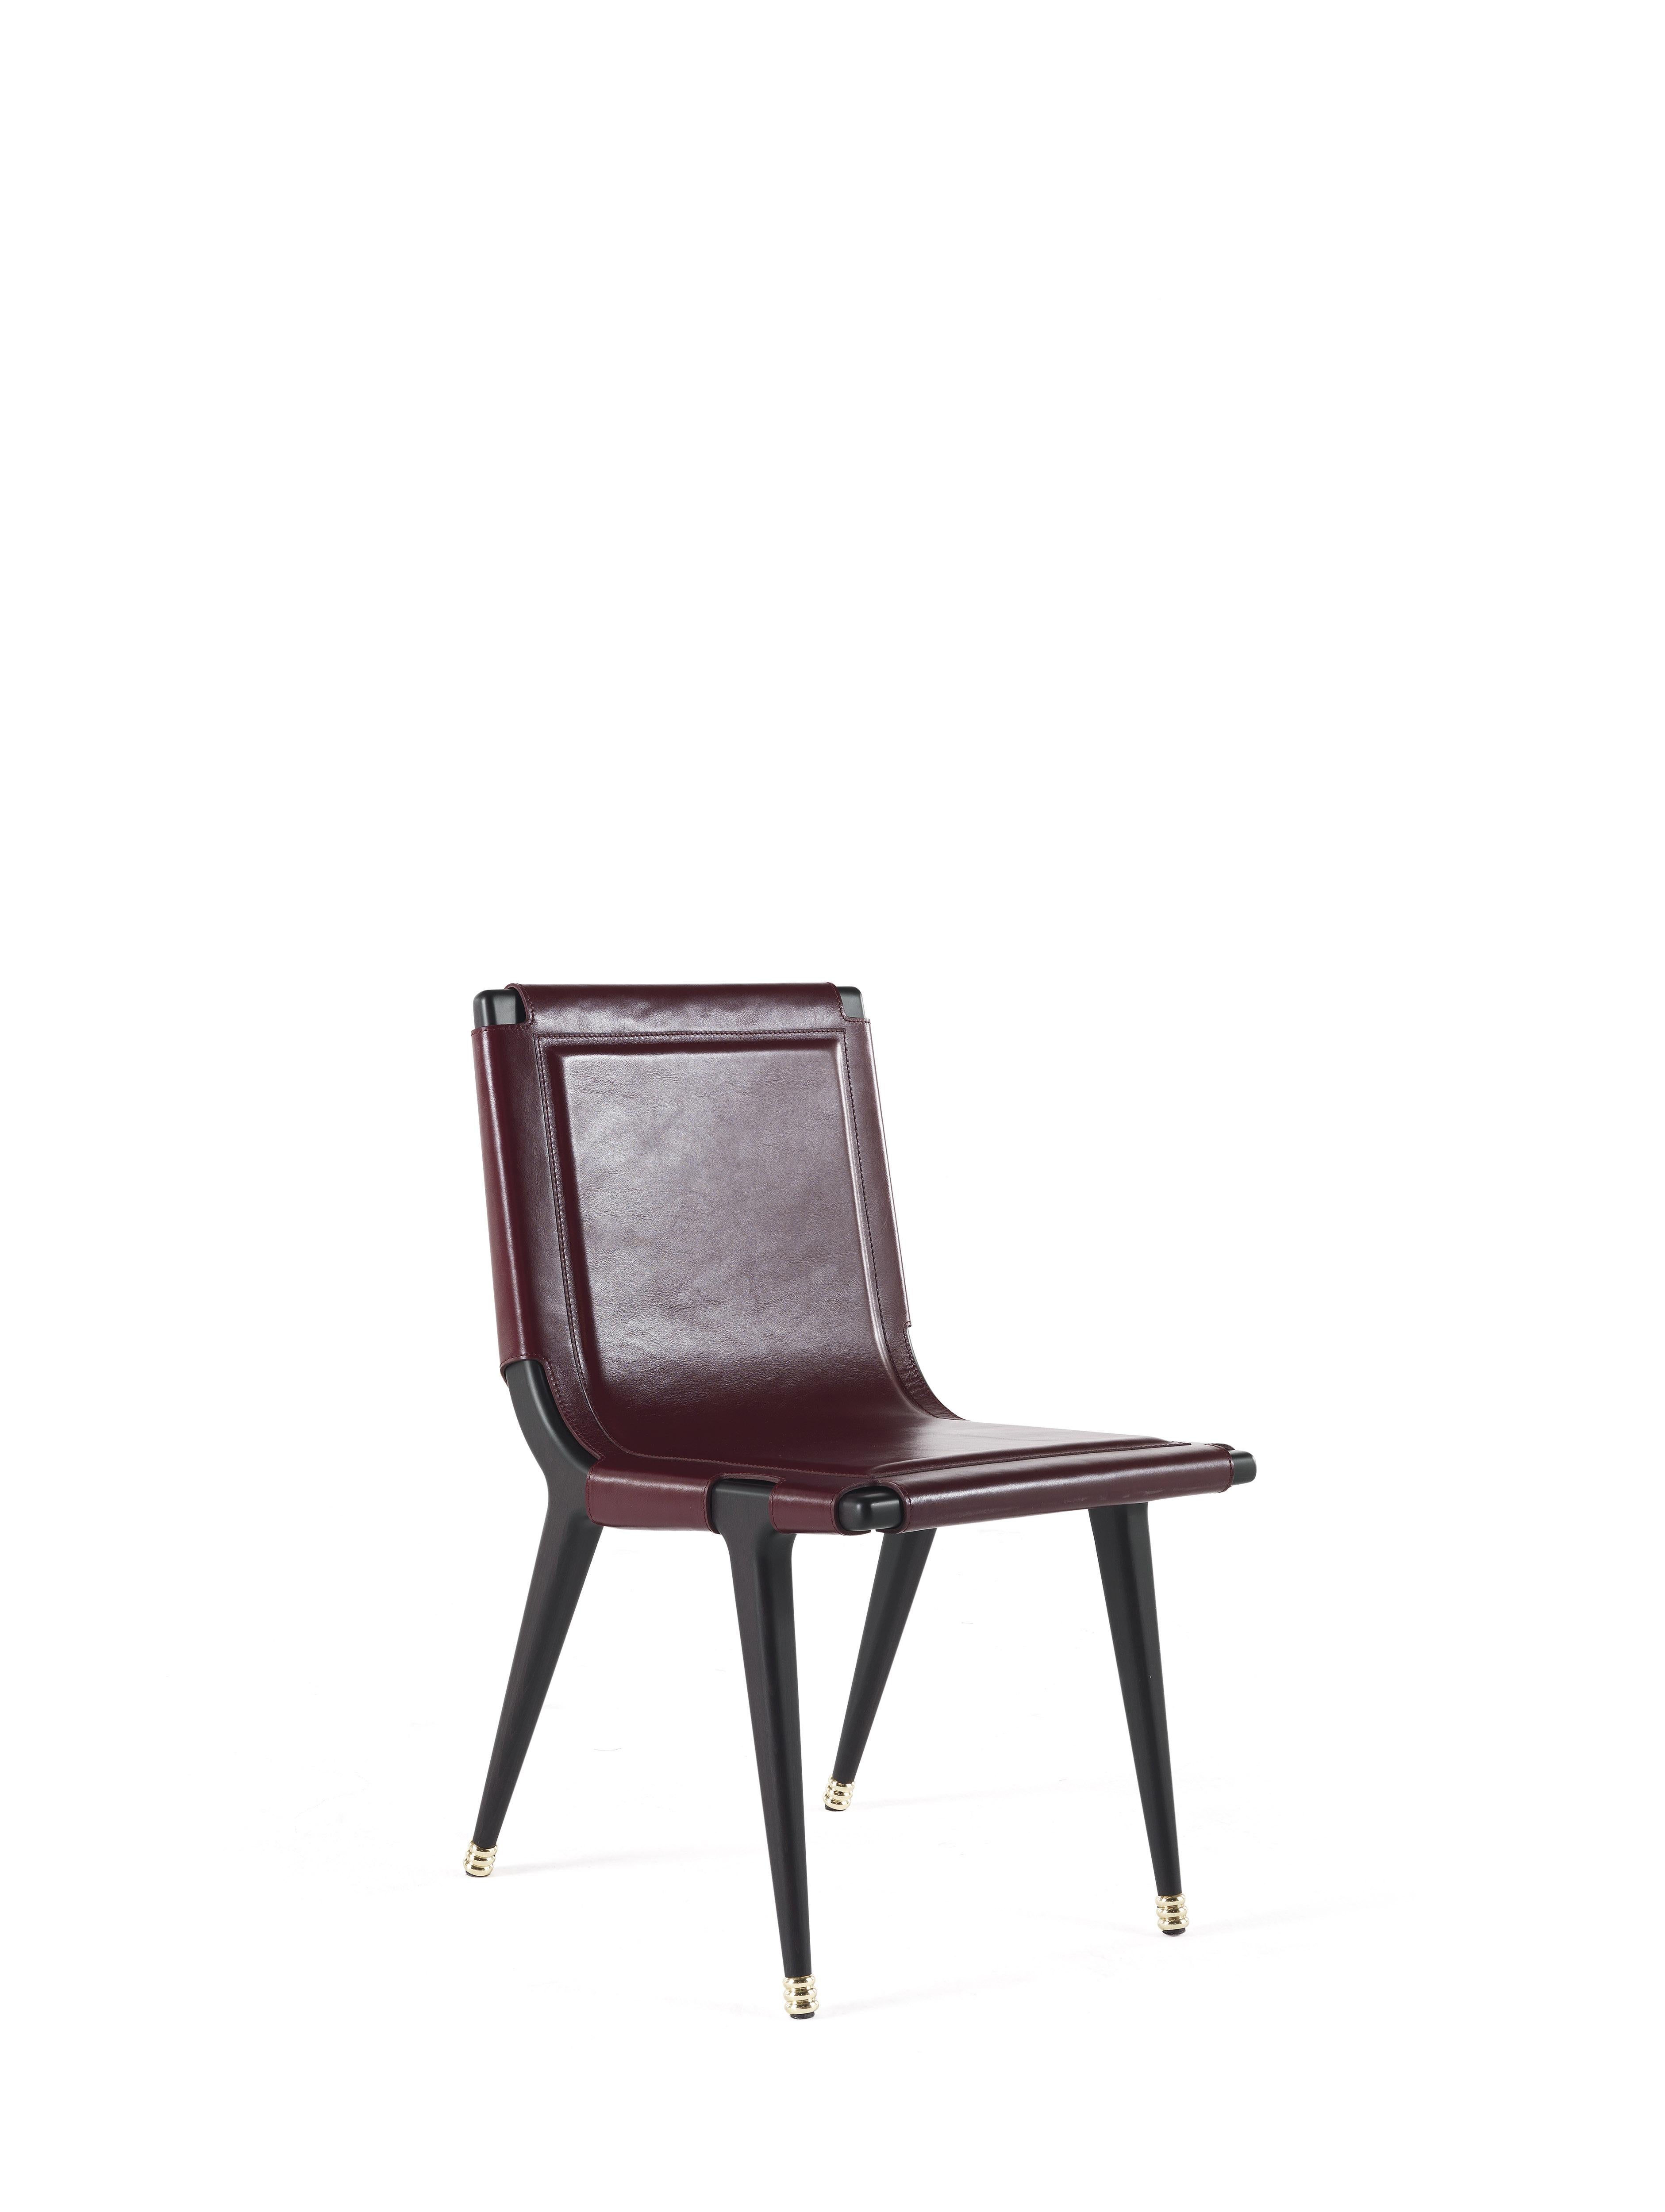 A chair full of fascinating details and evocative references. The precious upholstery in cherry color leather features a special rope binding with polished brass details on the back, while the structure in matte dark wengè wood with polished brass